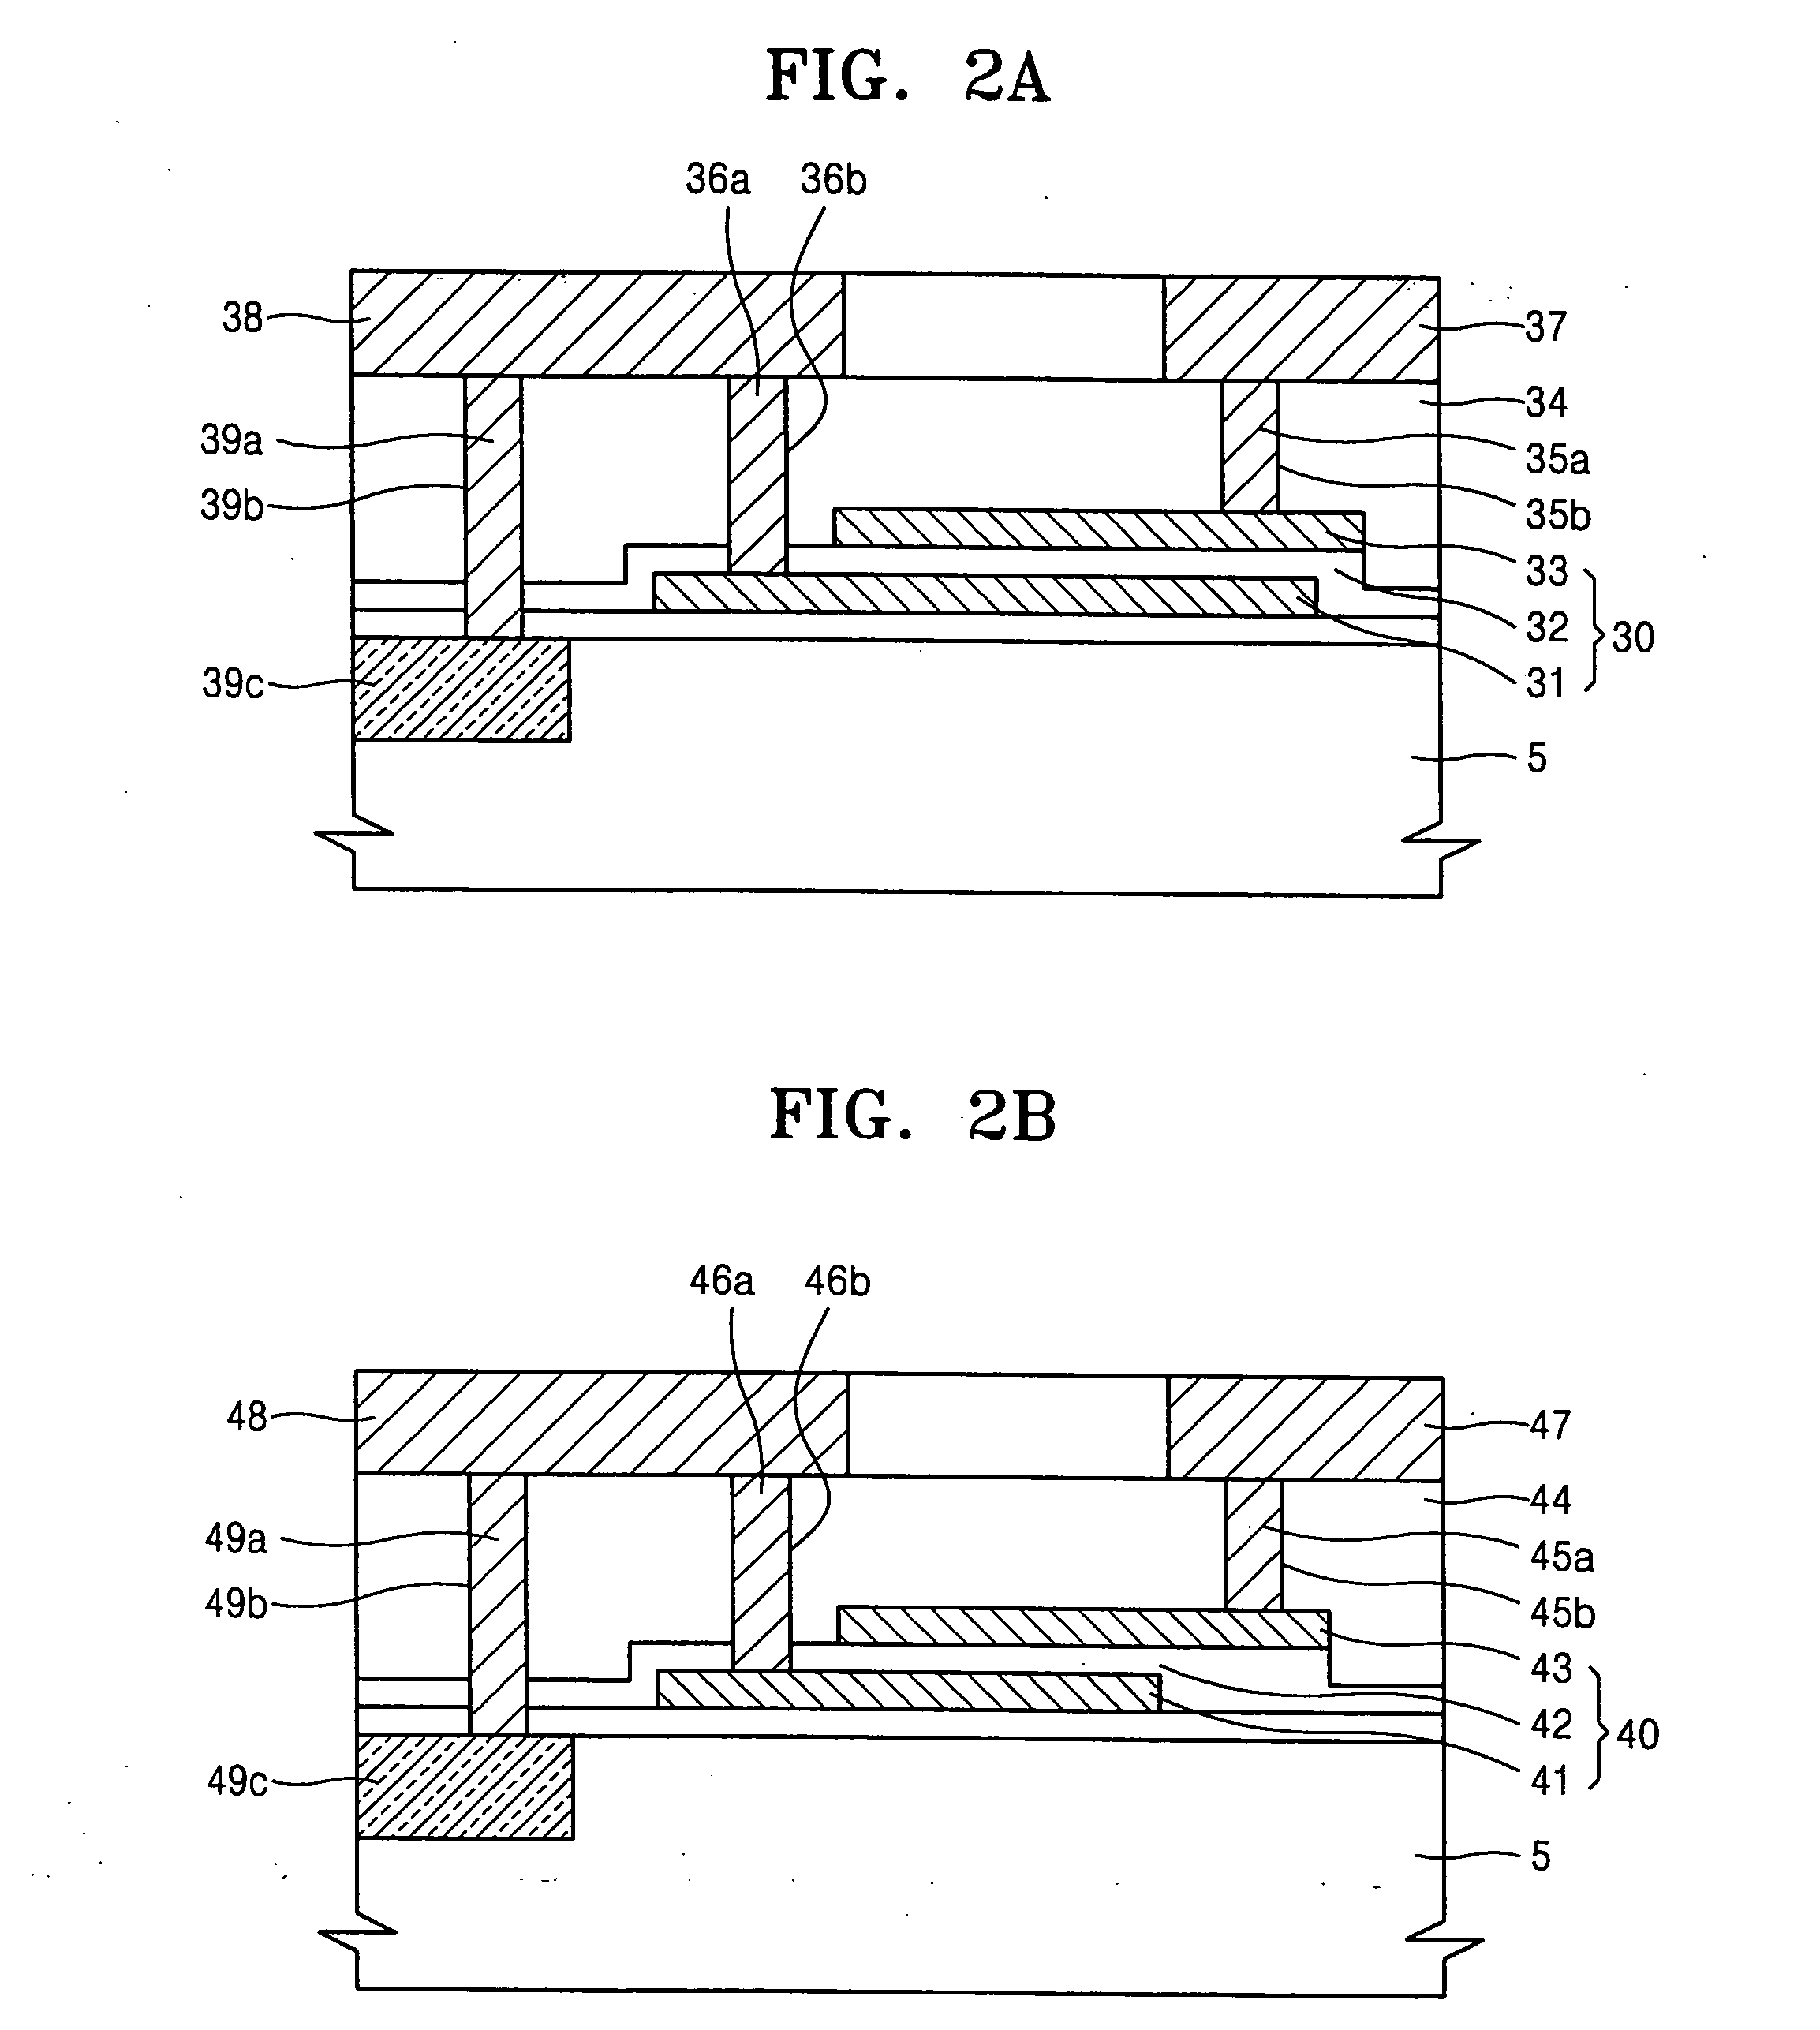 Metal-insulator-metal capacitor and interconnecting structure